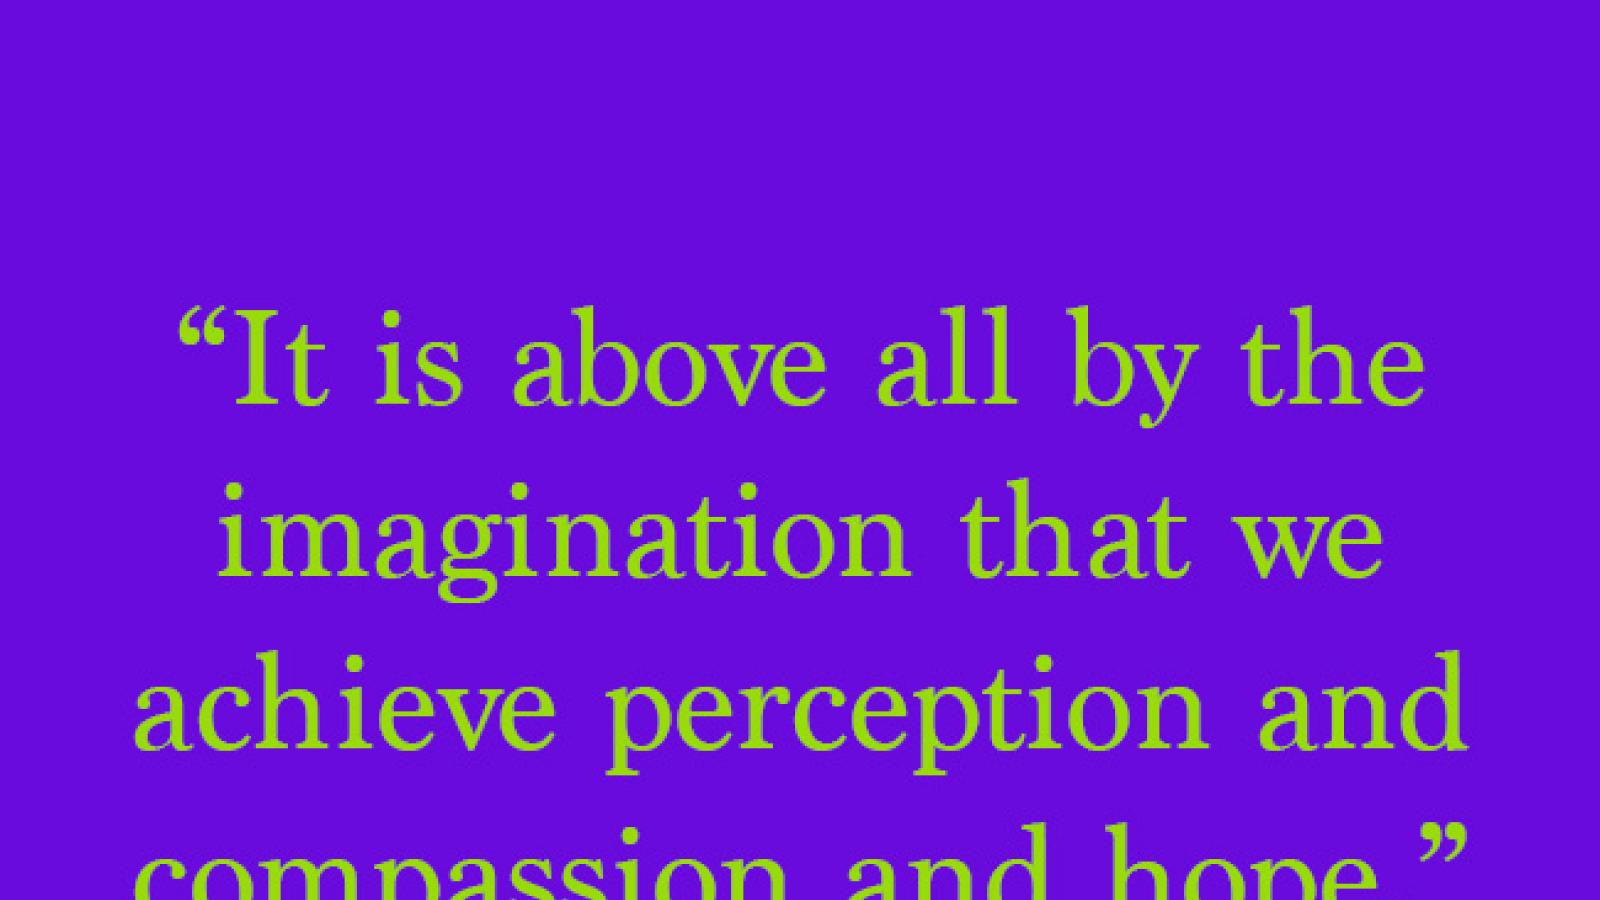 “It is above all by the imagination that we achieve perception and compassion and hope."